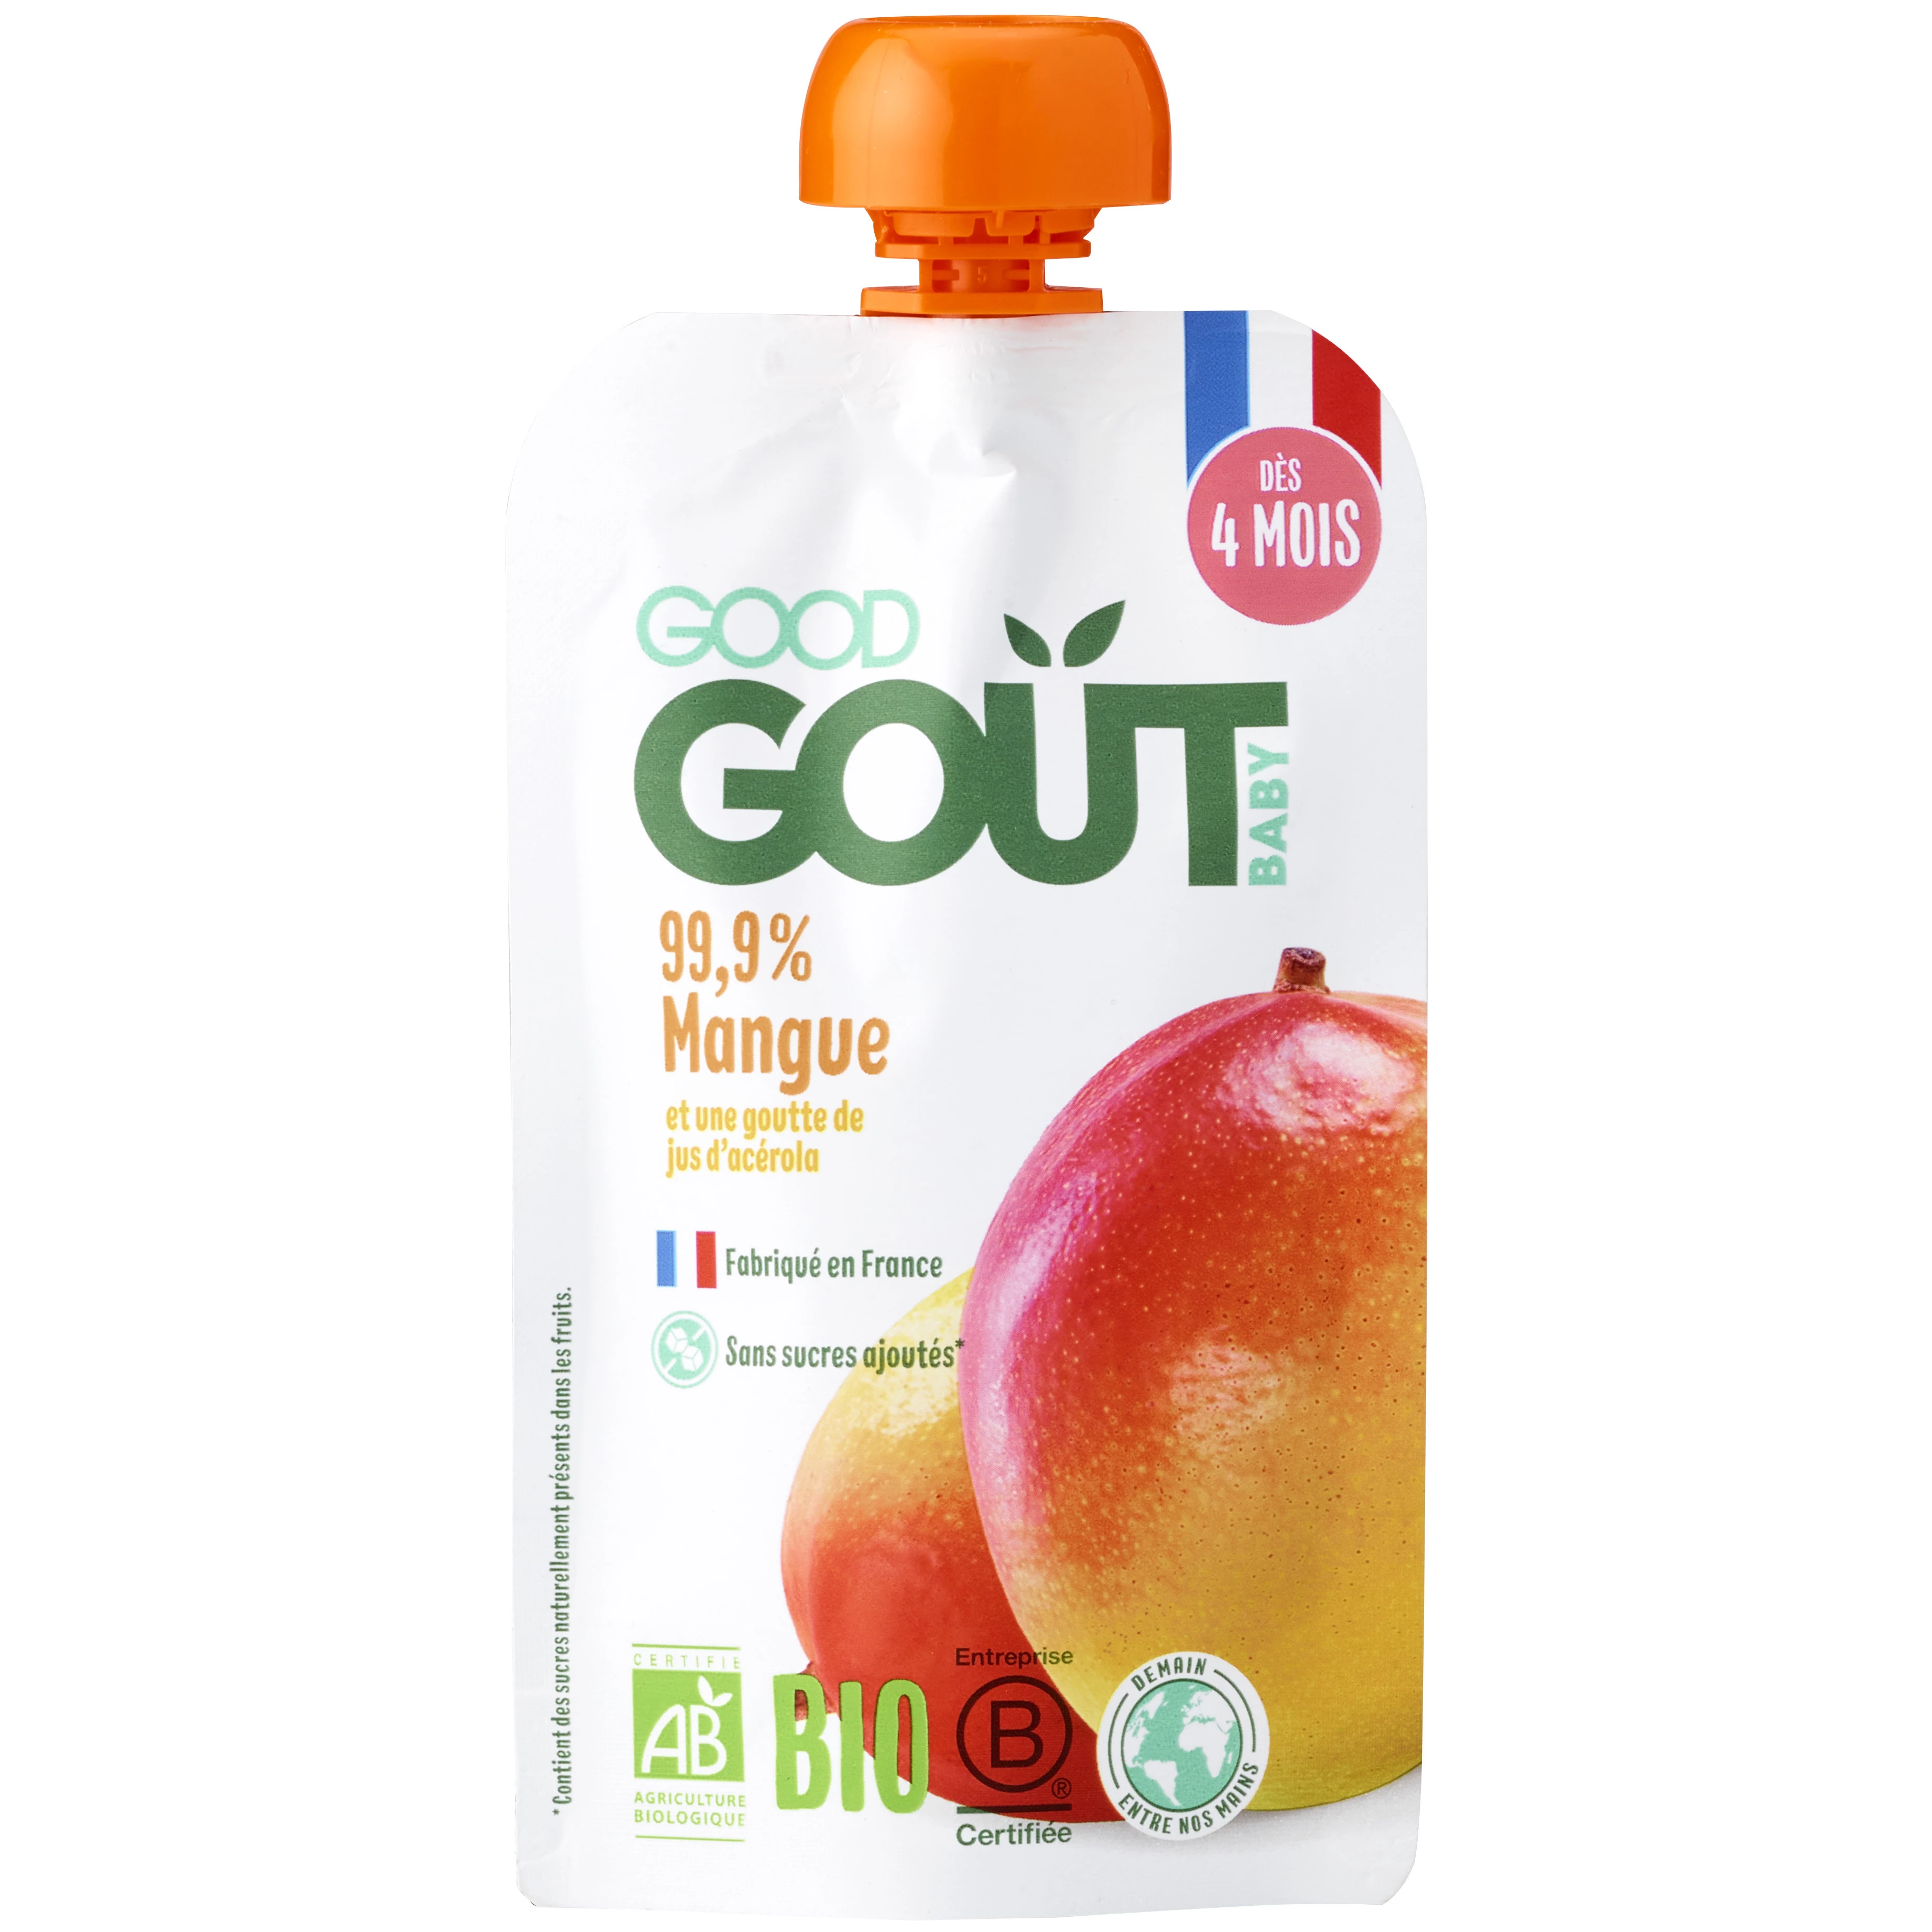 Mango gourd without added sugars Organic, 120g, GOOD GOUT